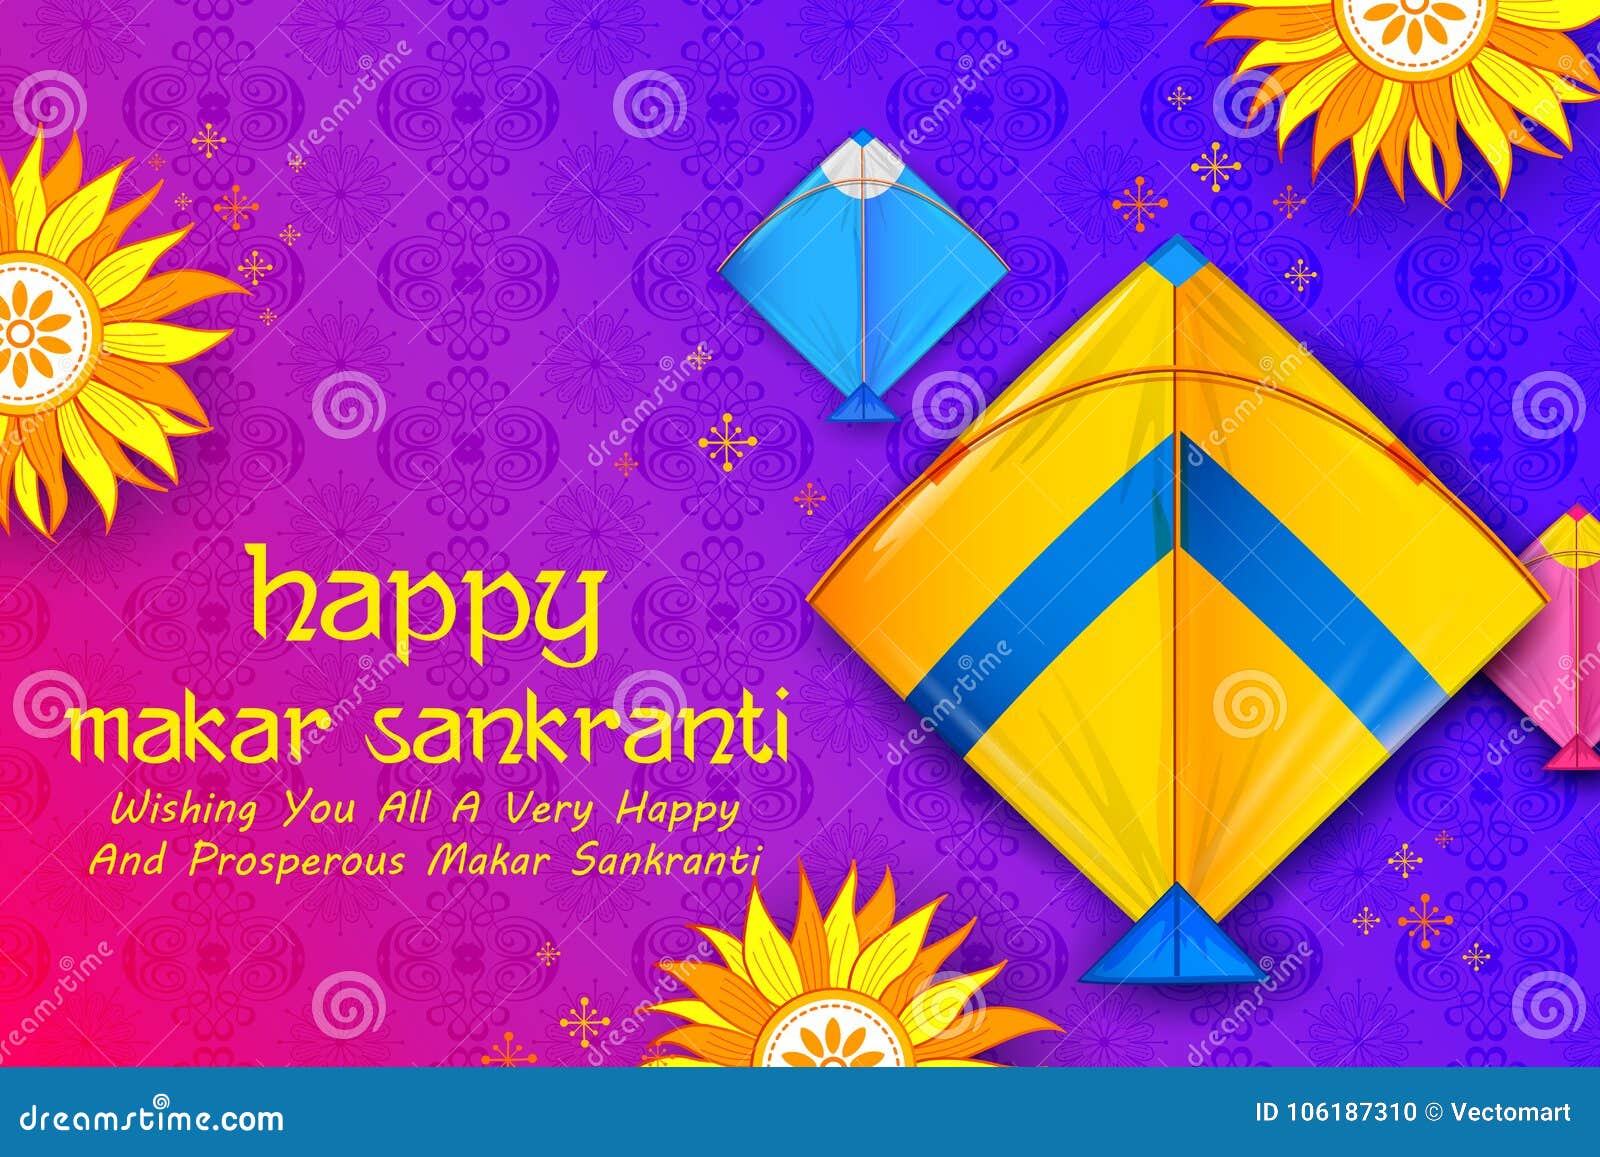 🔥 Happy Makar Sankranti Pictures HD For Mobile Wallpapers Dp | Image Free  Download